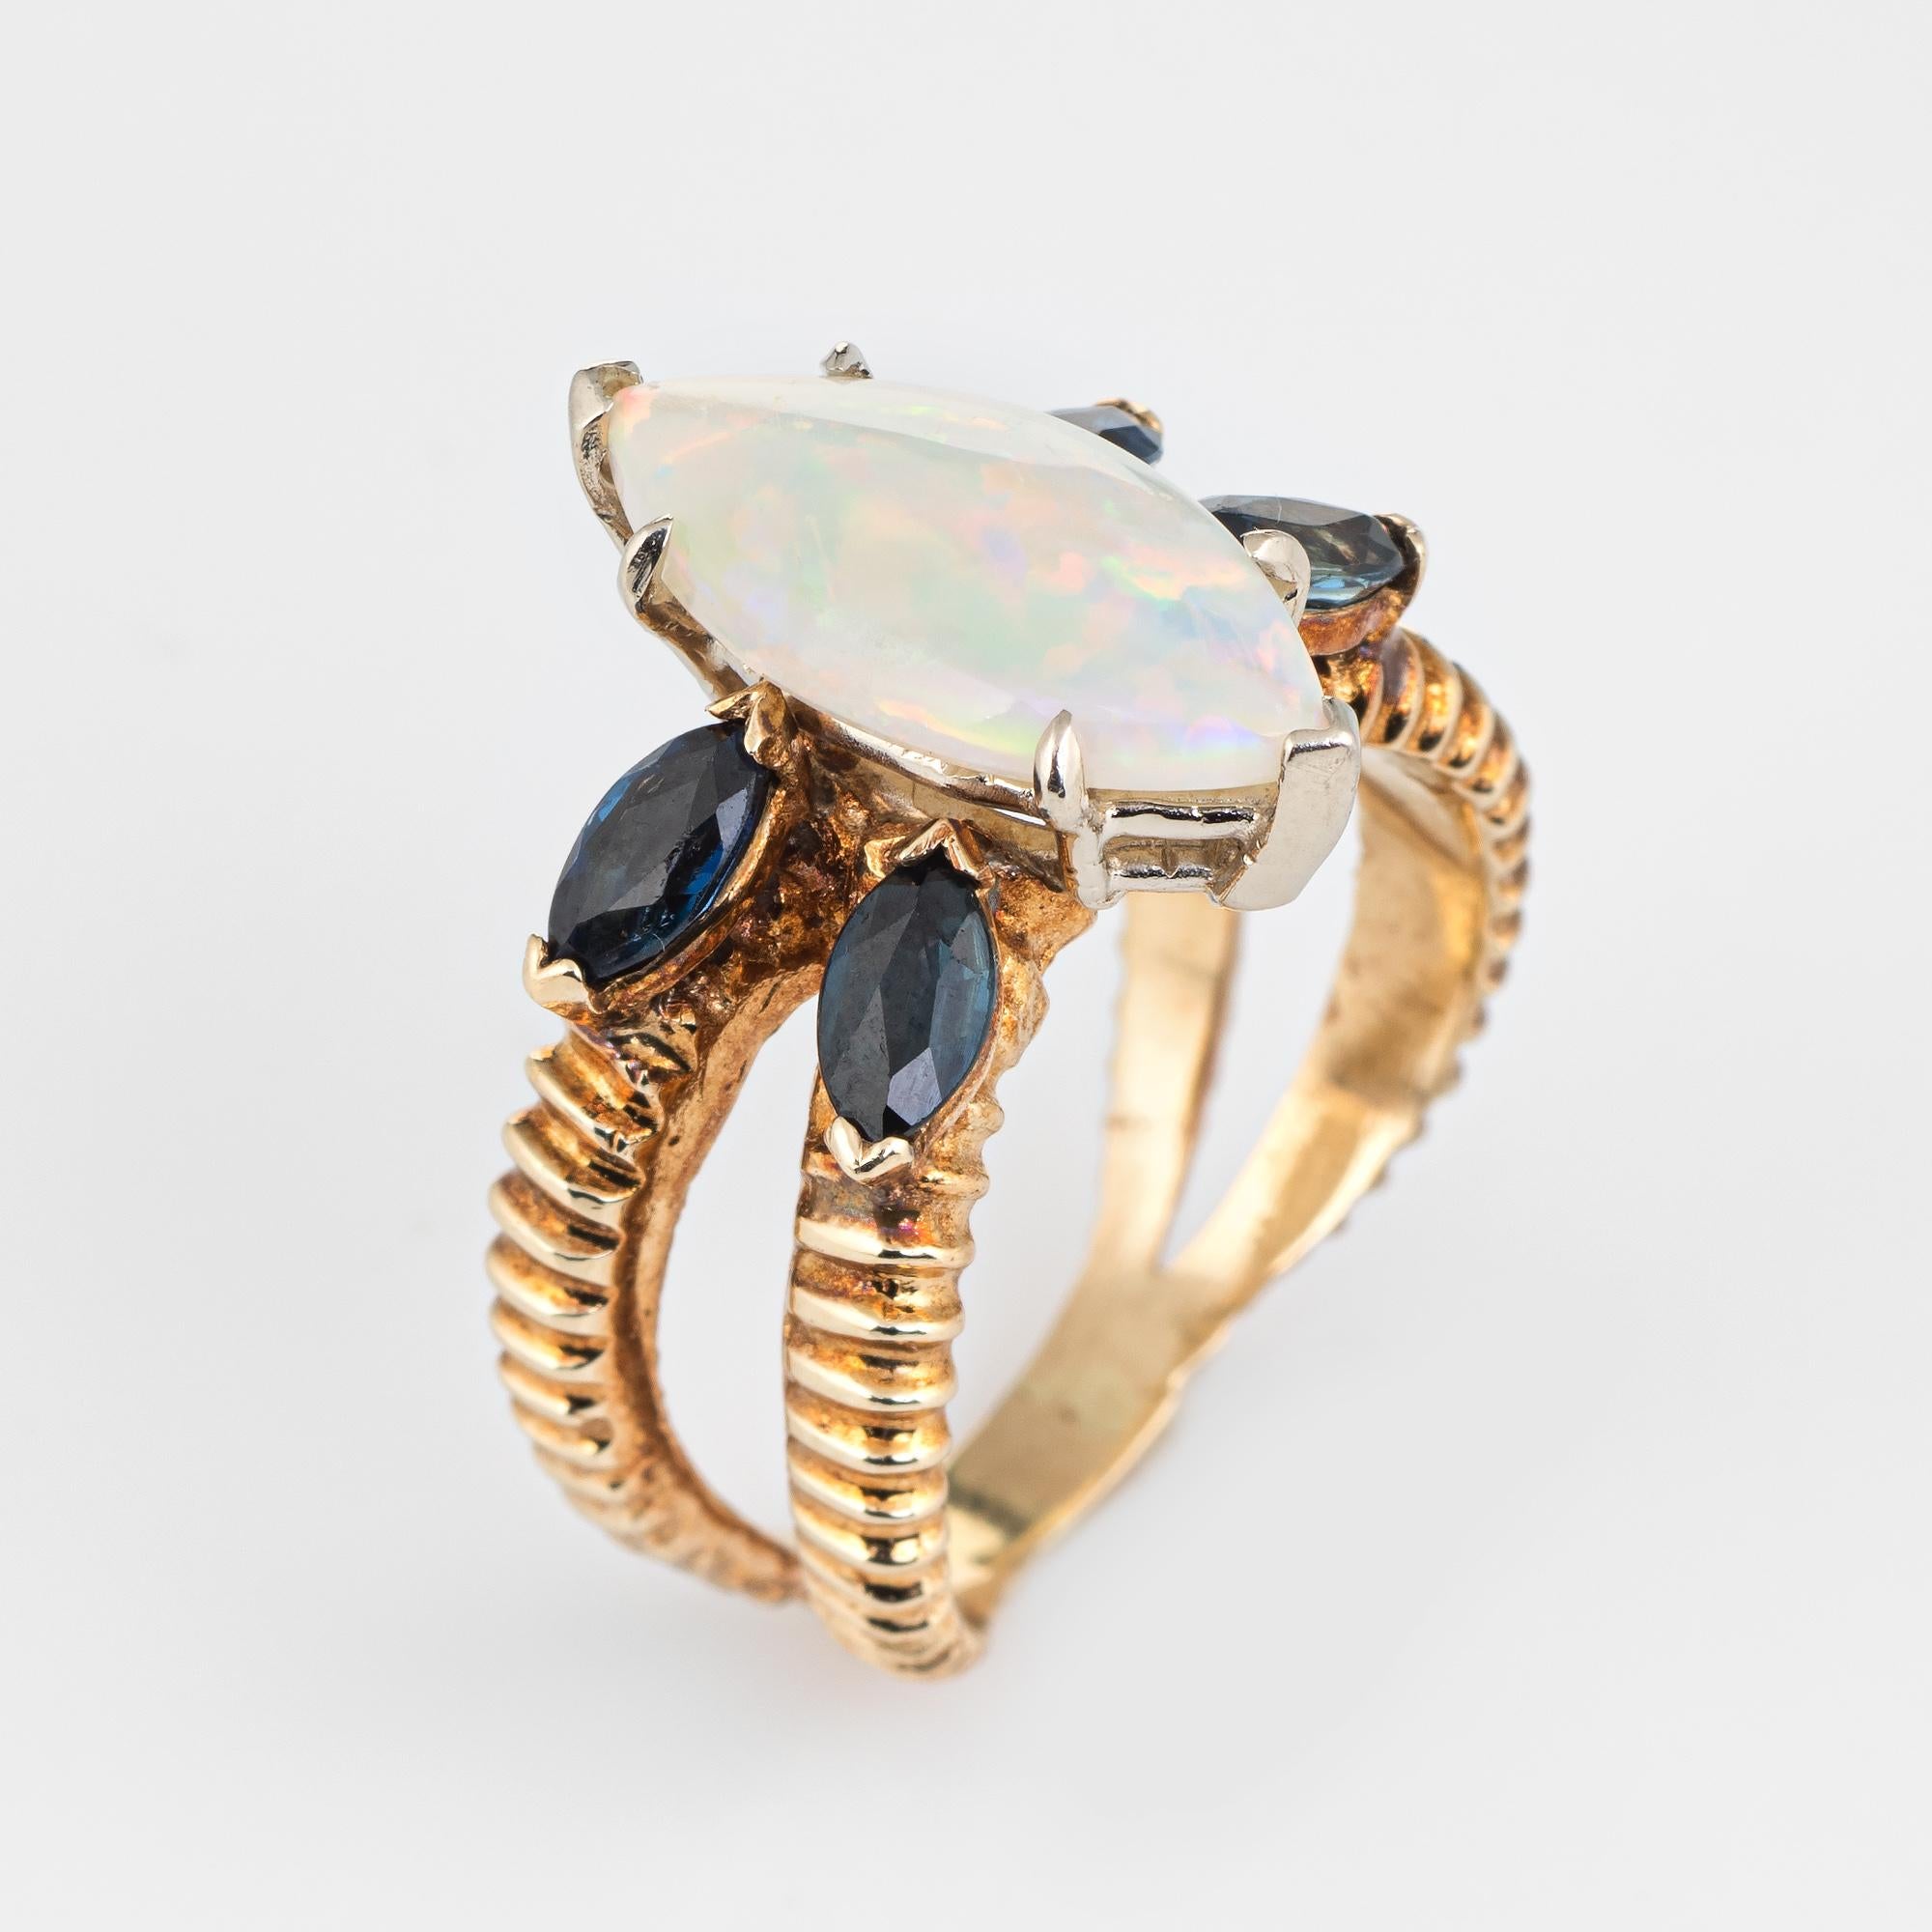 Stylish vintage opal & sapphire ring (circa 1970s) crafted in 14 karat yellow gold. 

Cabochon cut natural opal measures 15mm x 7.5mm (estimated at 3.50 carats), accented with four estimated 0.15 carat (each) marquise cut blue sapphire. The total